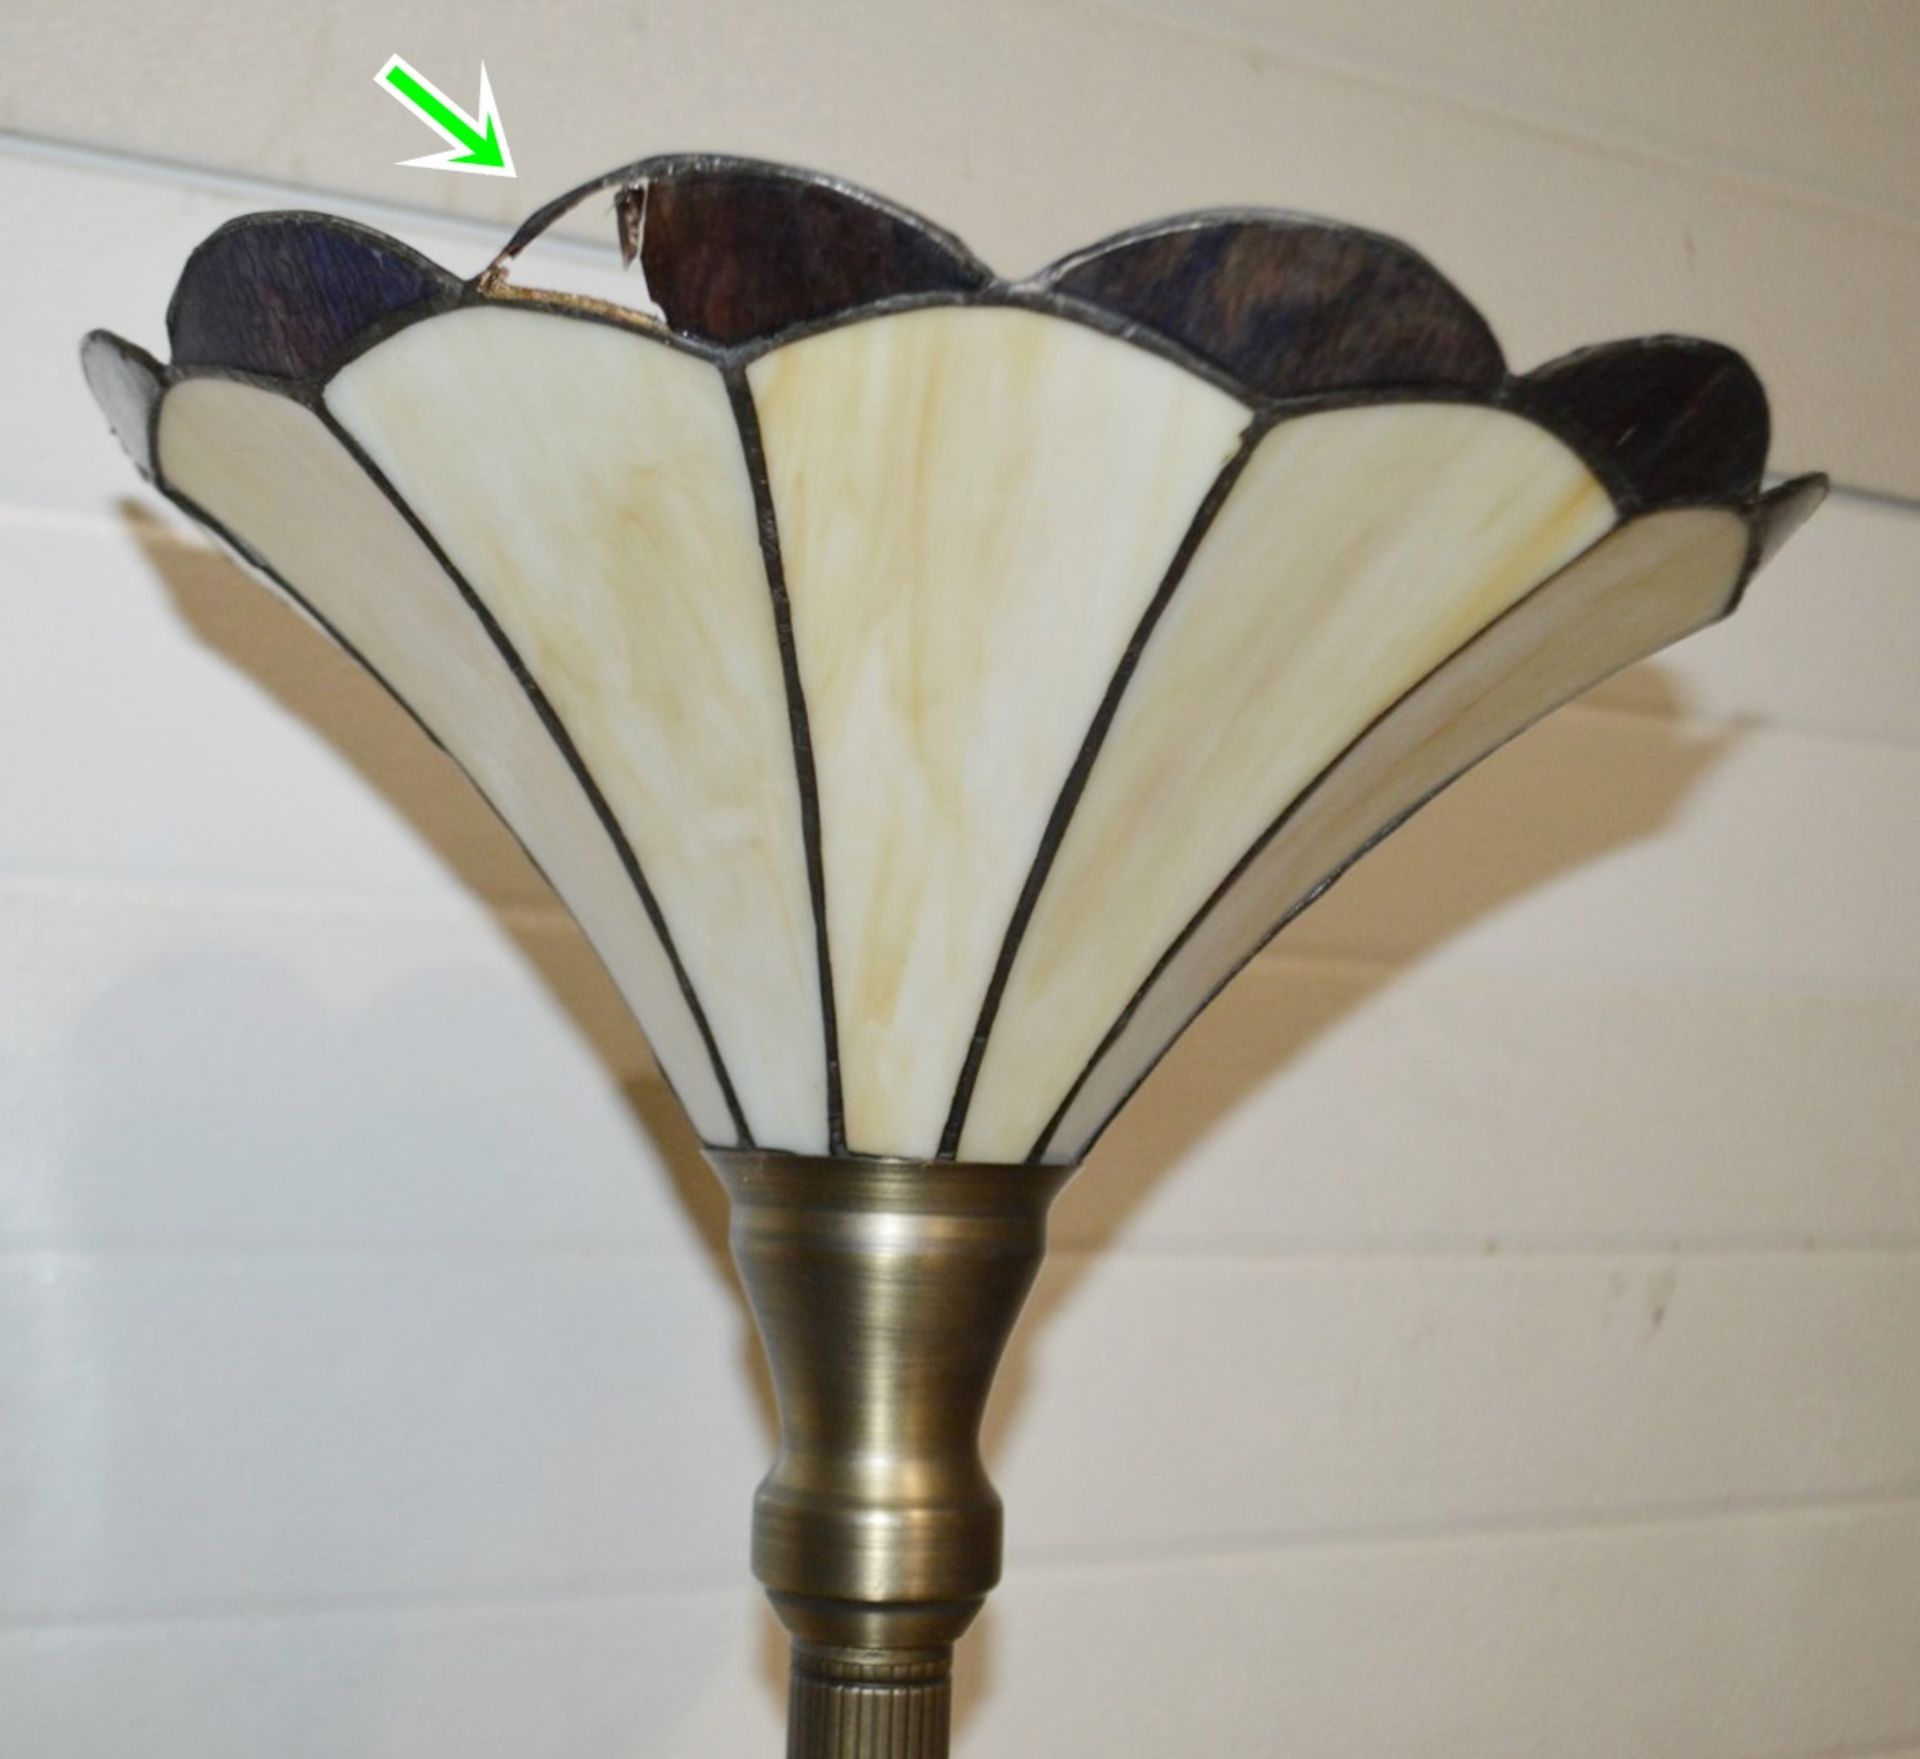 1 x Floorstanding Tiffany-style Lamp With A Glass Uplighter Shade And An Aged Bronze Finish - From - Image 6 of 10